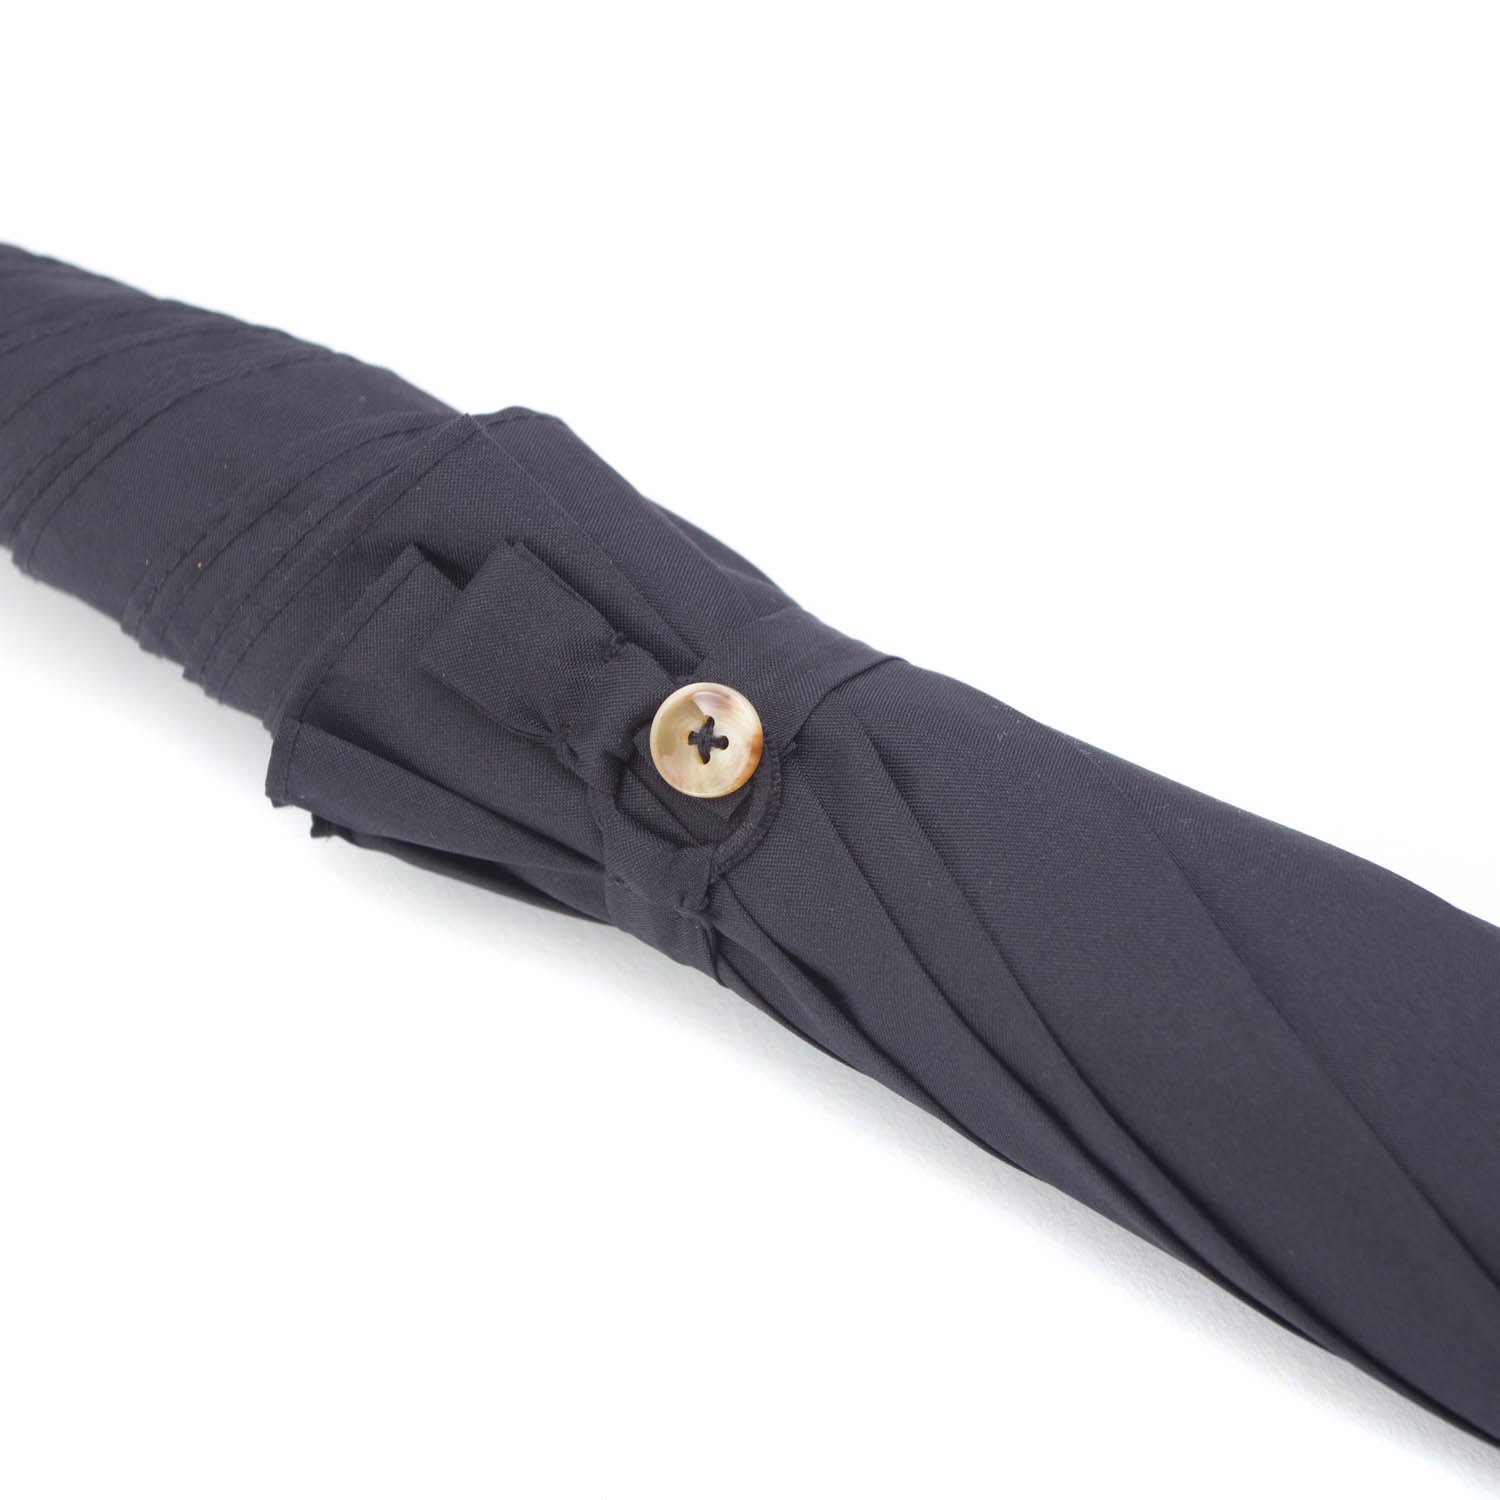 A Mario Talarico Black Canopy Umbrella with Dog Horn Handle from KirbyAllison.com, with a gold button on its canopy.